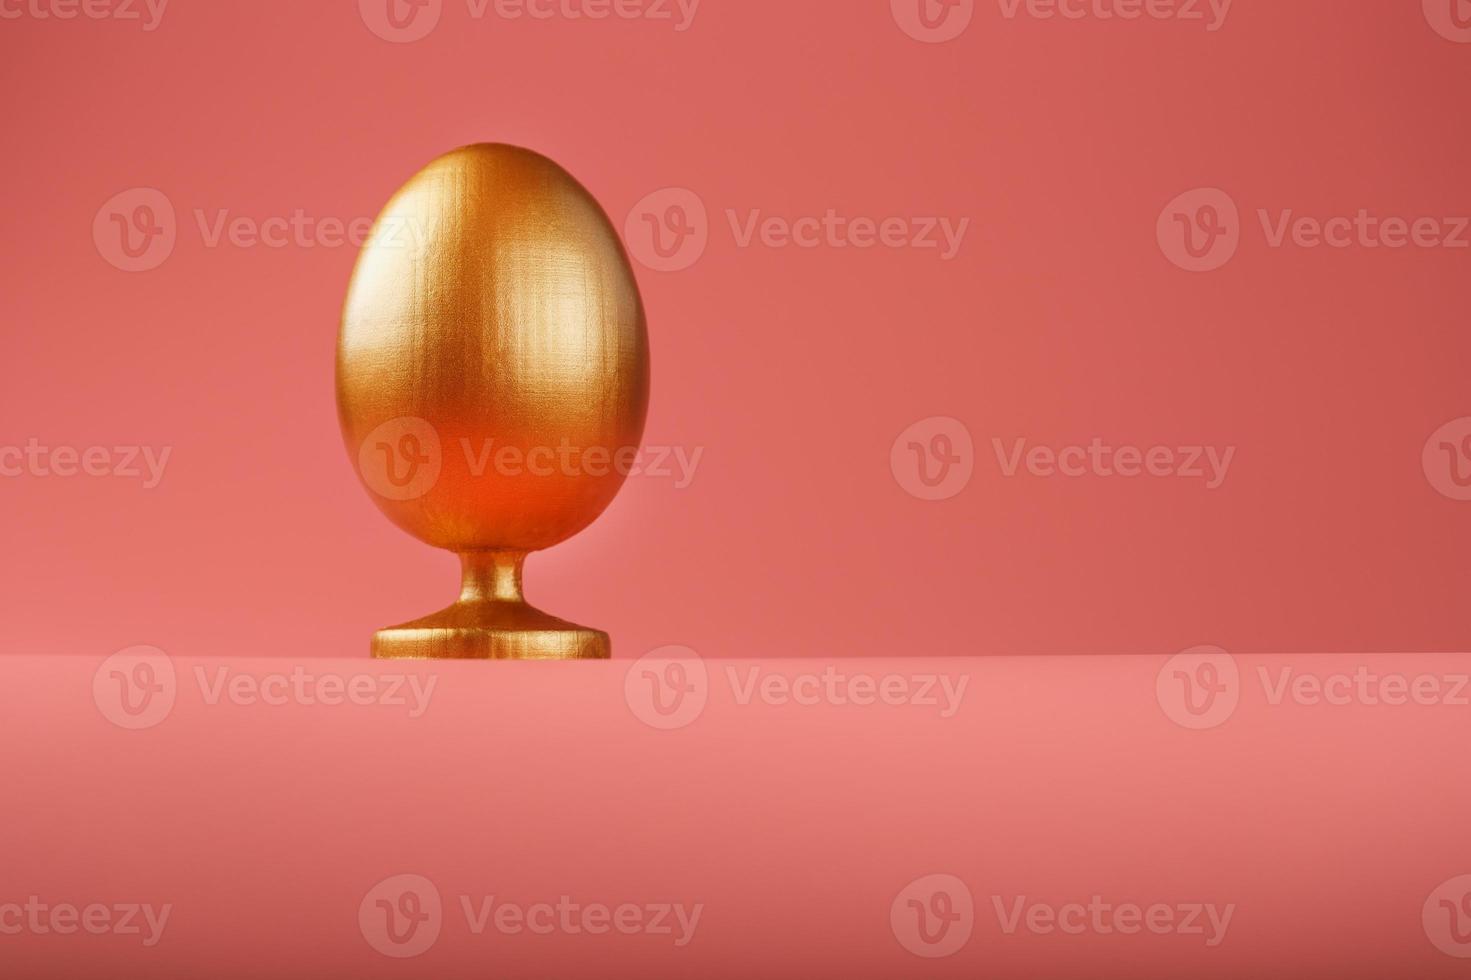 Golden egg on a pink background with a minimalistic concept. Space for text. Easter egg design templates. Stylish decor with minimal concept. photo